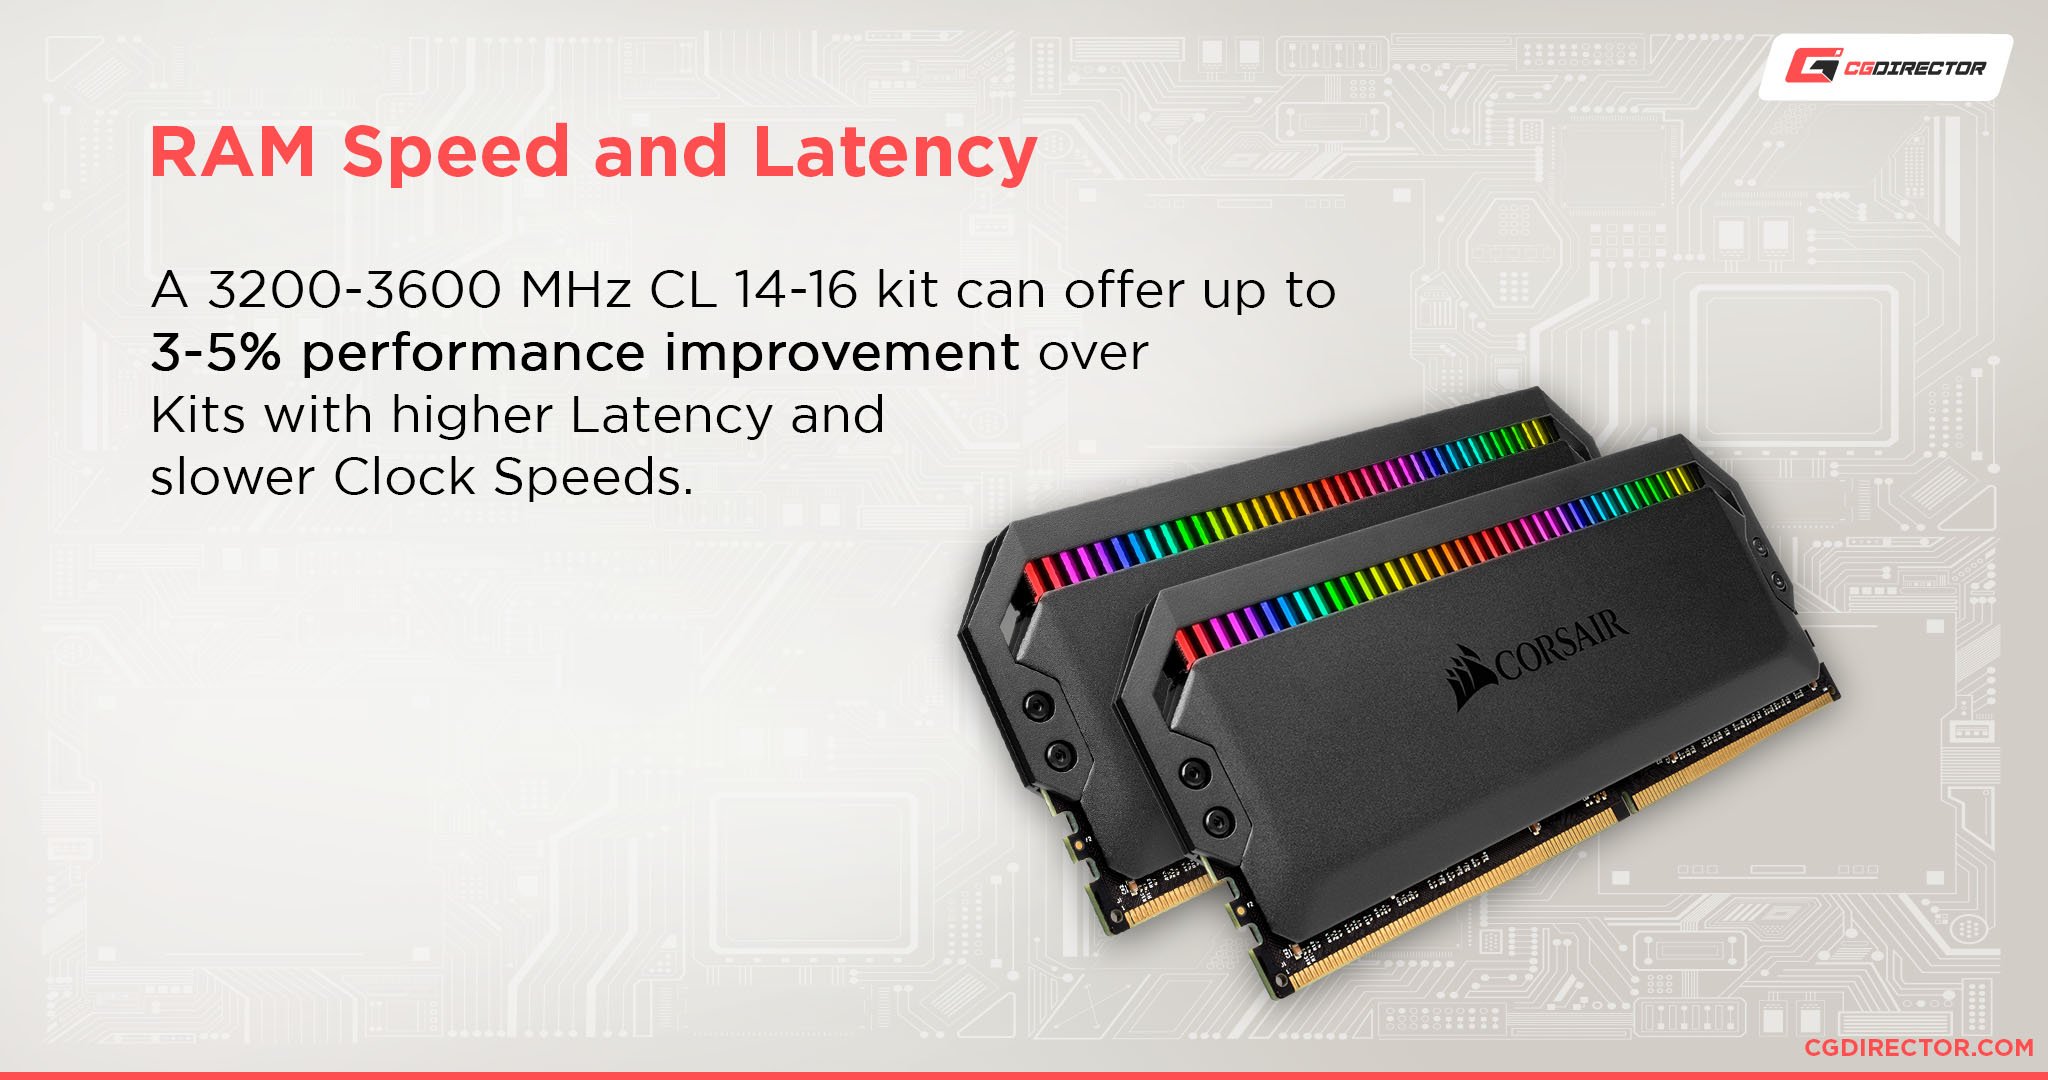 Performance Improvement through RAM Modules with lower latency and higher clock speeds